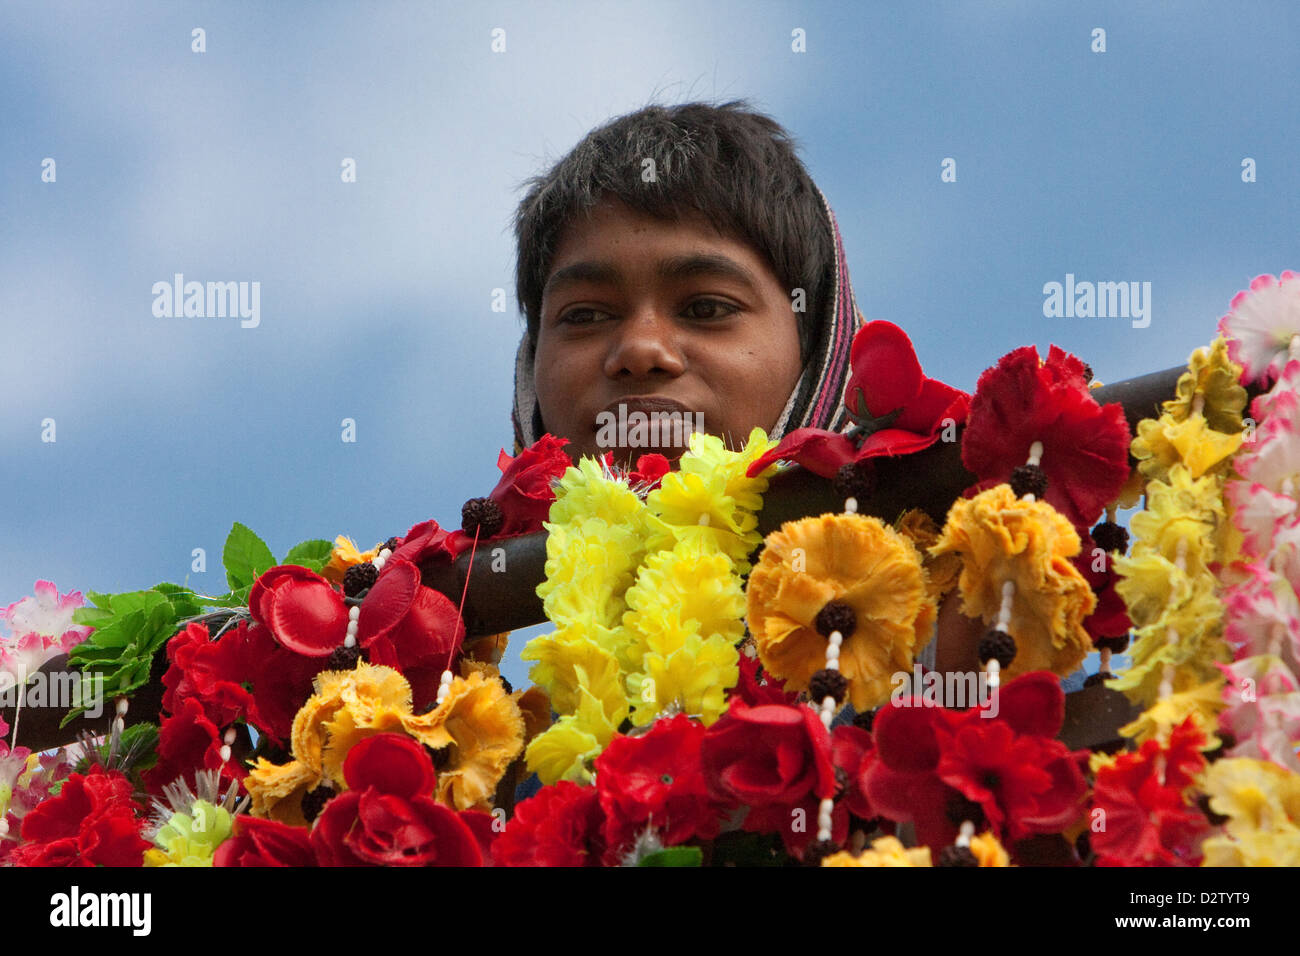 India, Rishikesh. Boy with Flowers for Sale as Offerings. Stock Photo